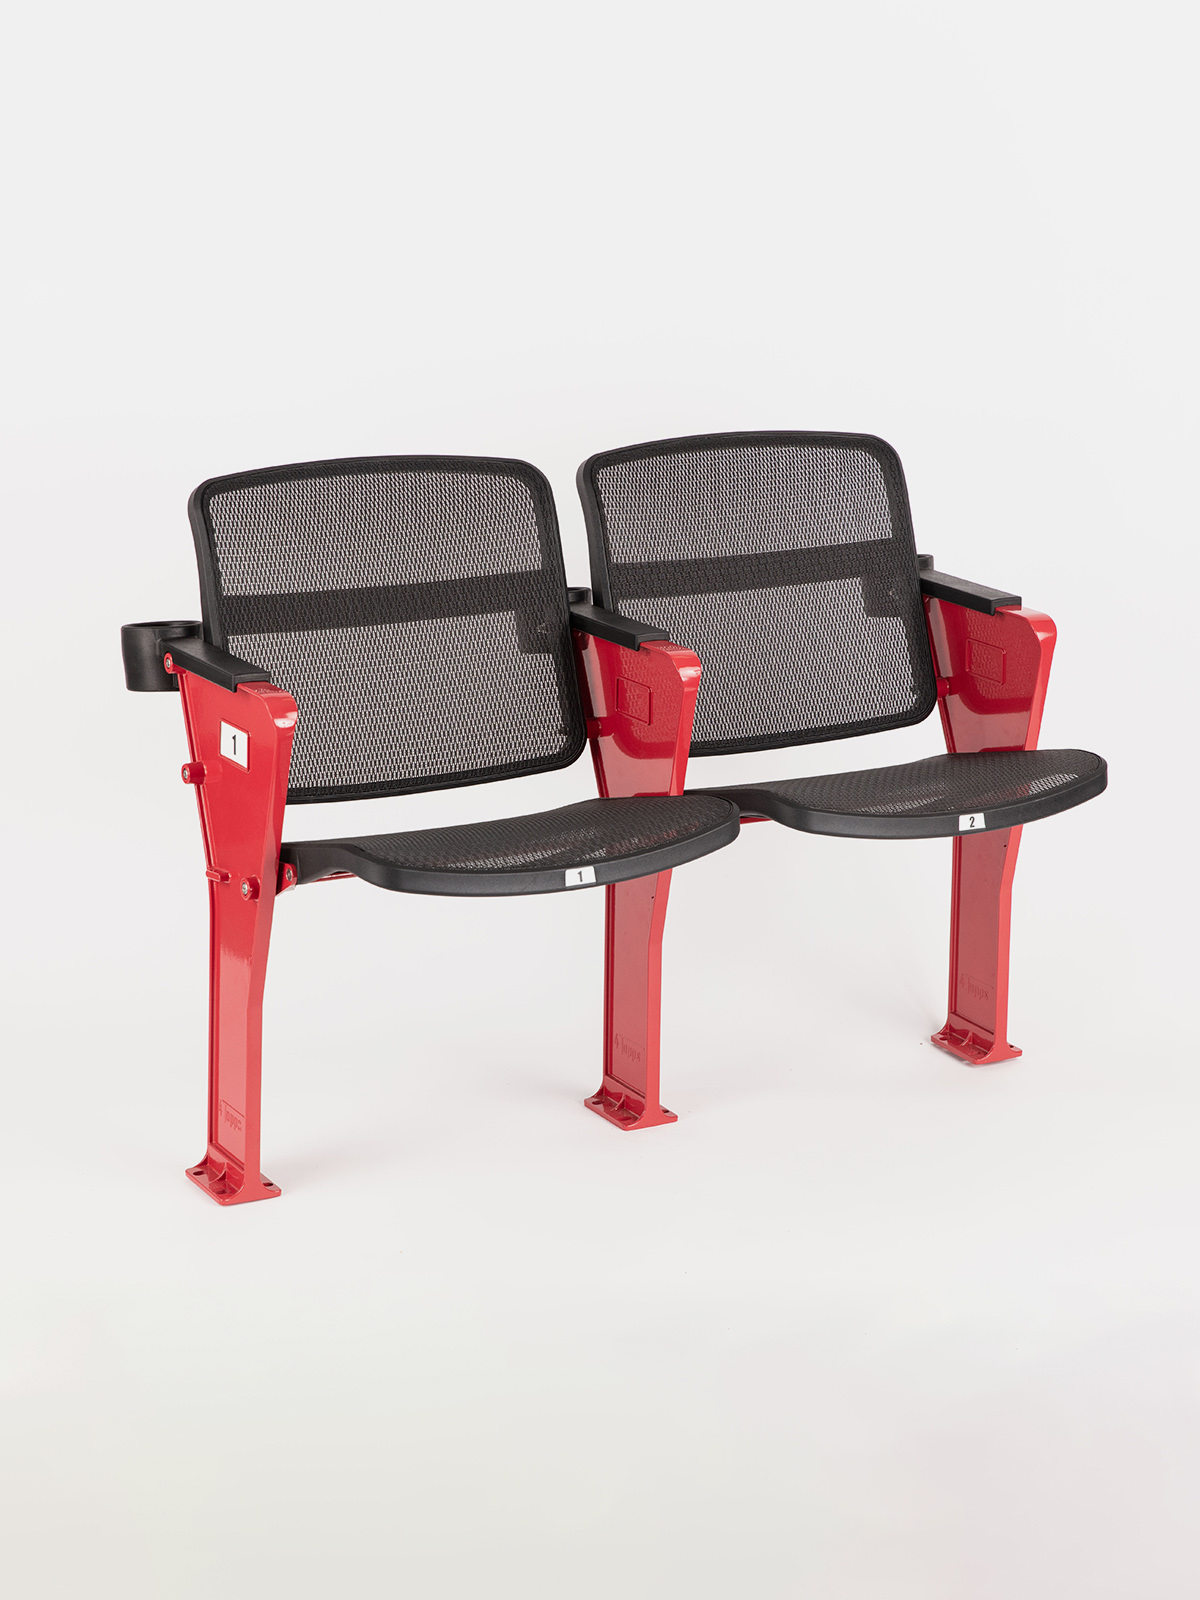 A slightly turned view of a set of two red frame 4Topps row seating on white background